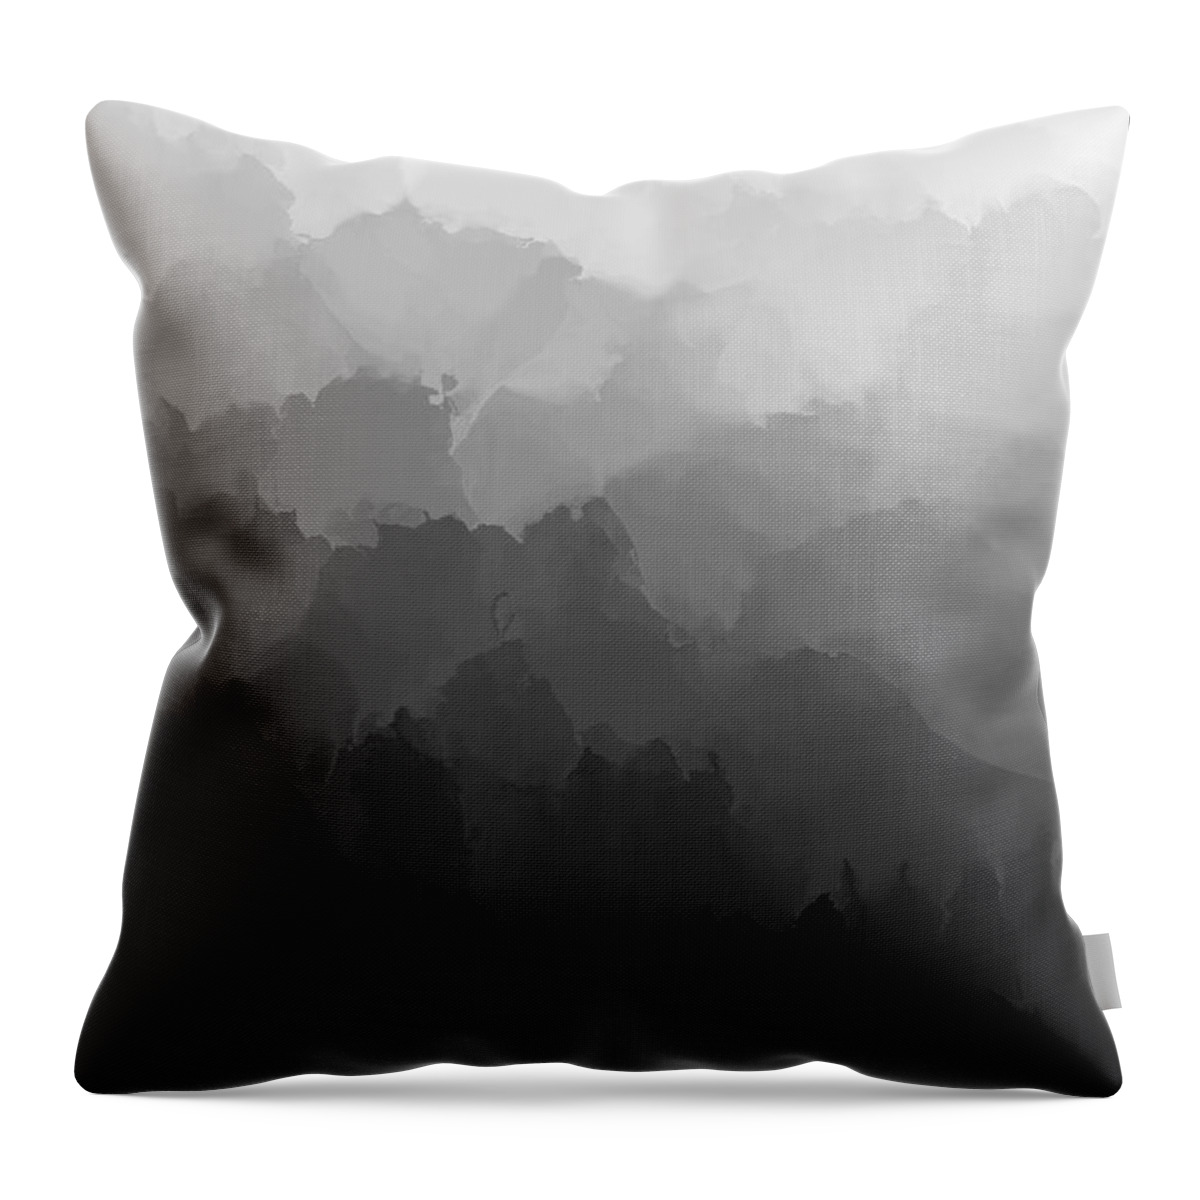 Fine Art Throw Pillow featuring the digital art Study in Black and White 110112 by David Lane